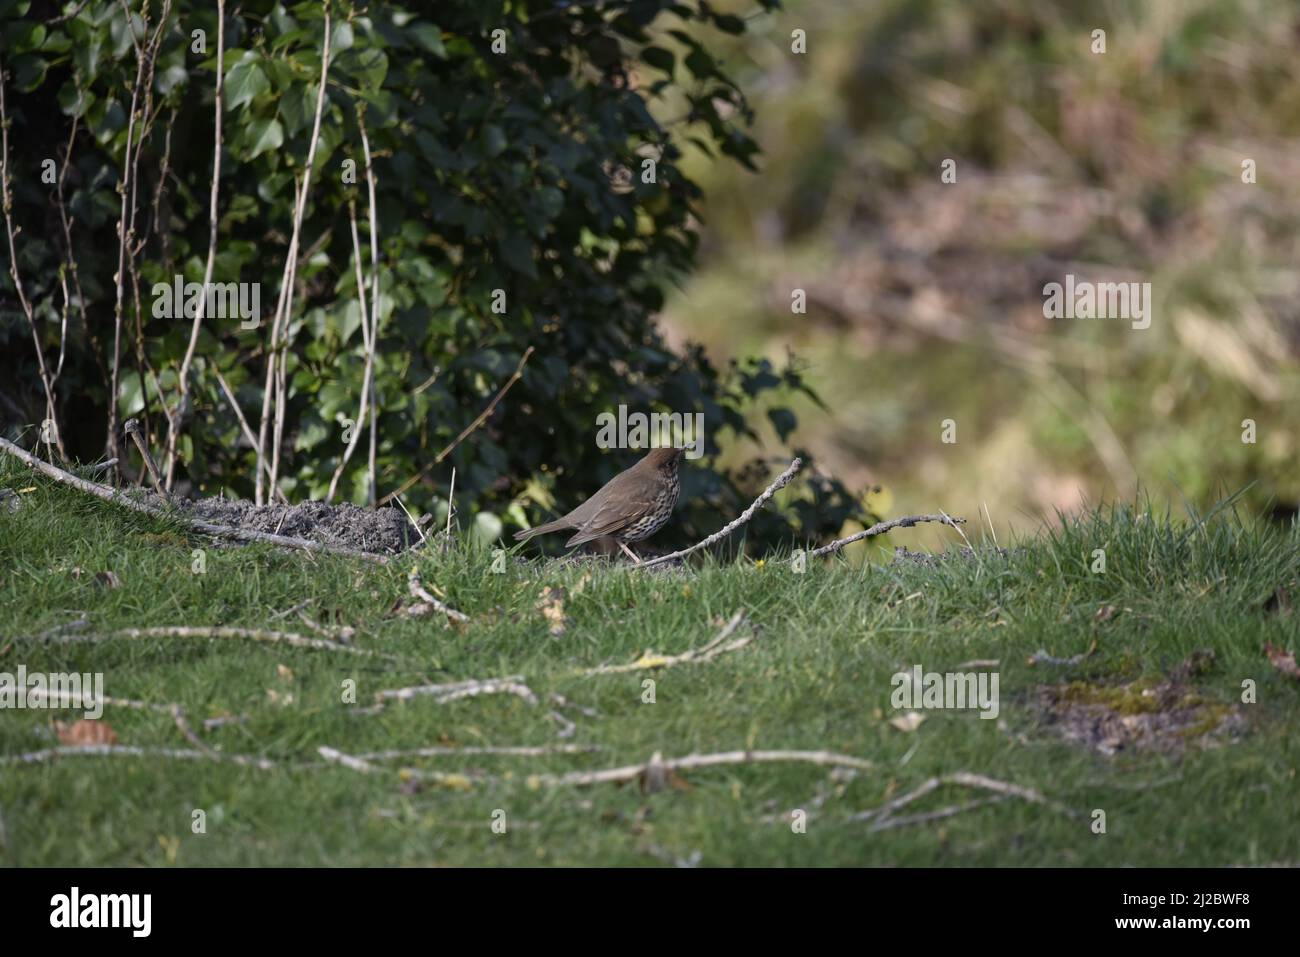 Song Thrush (Turdus philomelos) in Right-Profile with a Worm in Its Beak, Looking to Right of Image, in Welsh Countryside, UK in Spring Stock Photo